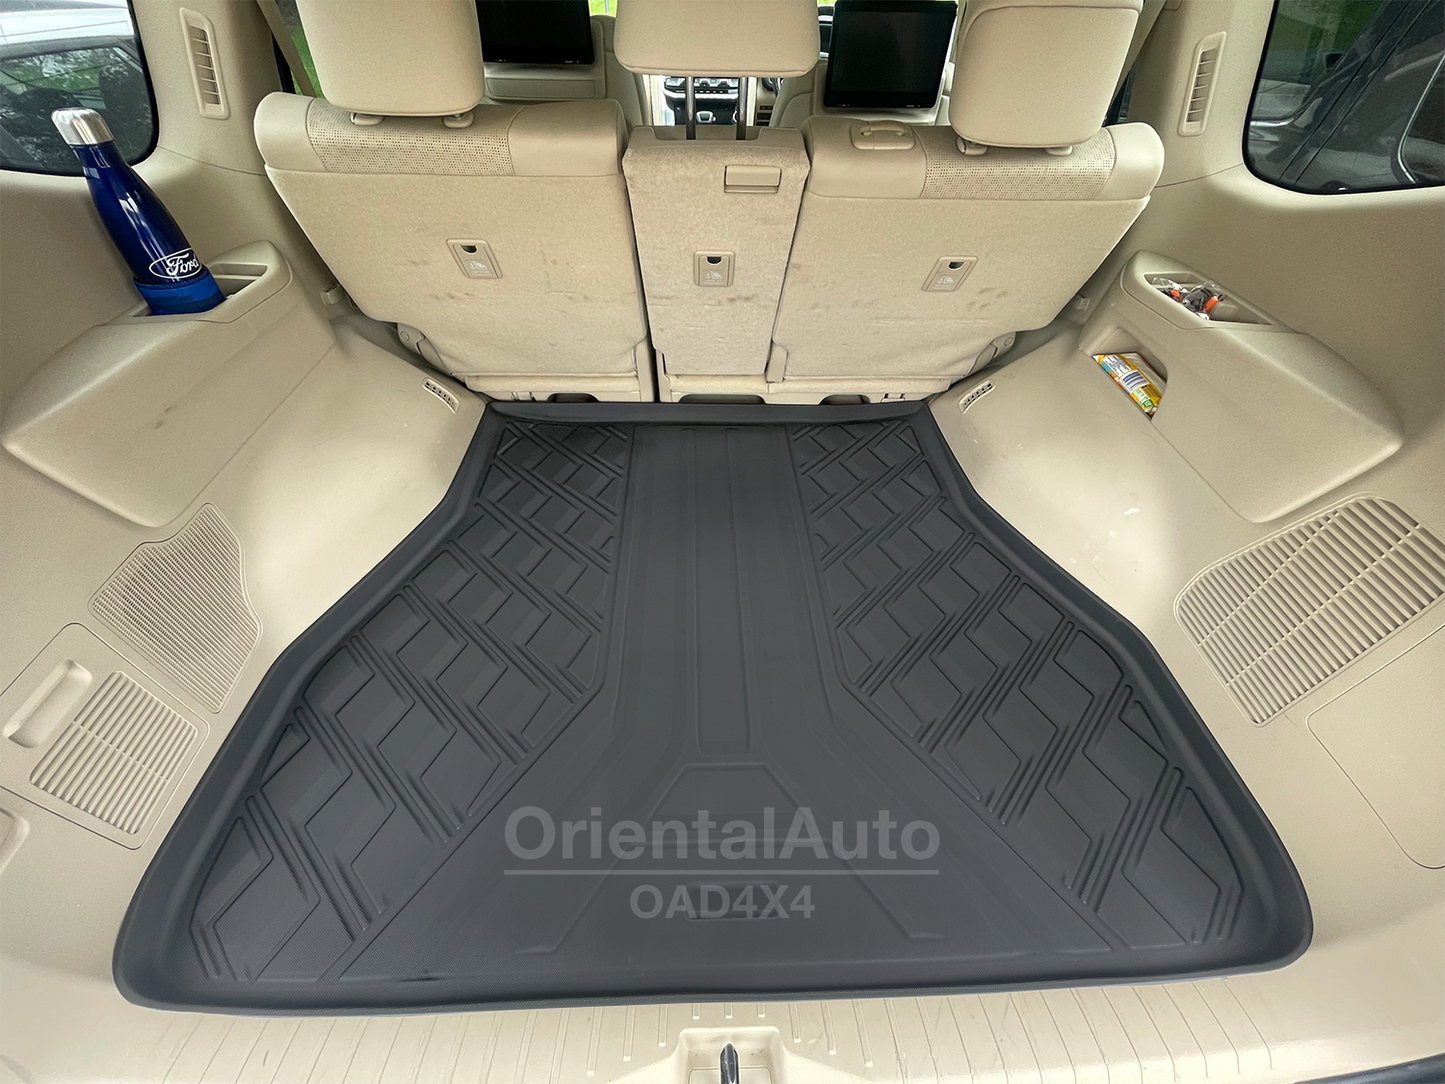 Injection Stainless Weathershields & 3D Cargo Mat for Toyota Landcruiser 300 5 Sests 2021-Onwards Land Cruiser 300 LC300 5 Seats Weather Shields Window Visor Boot Mat